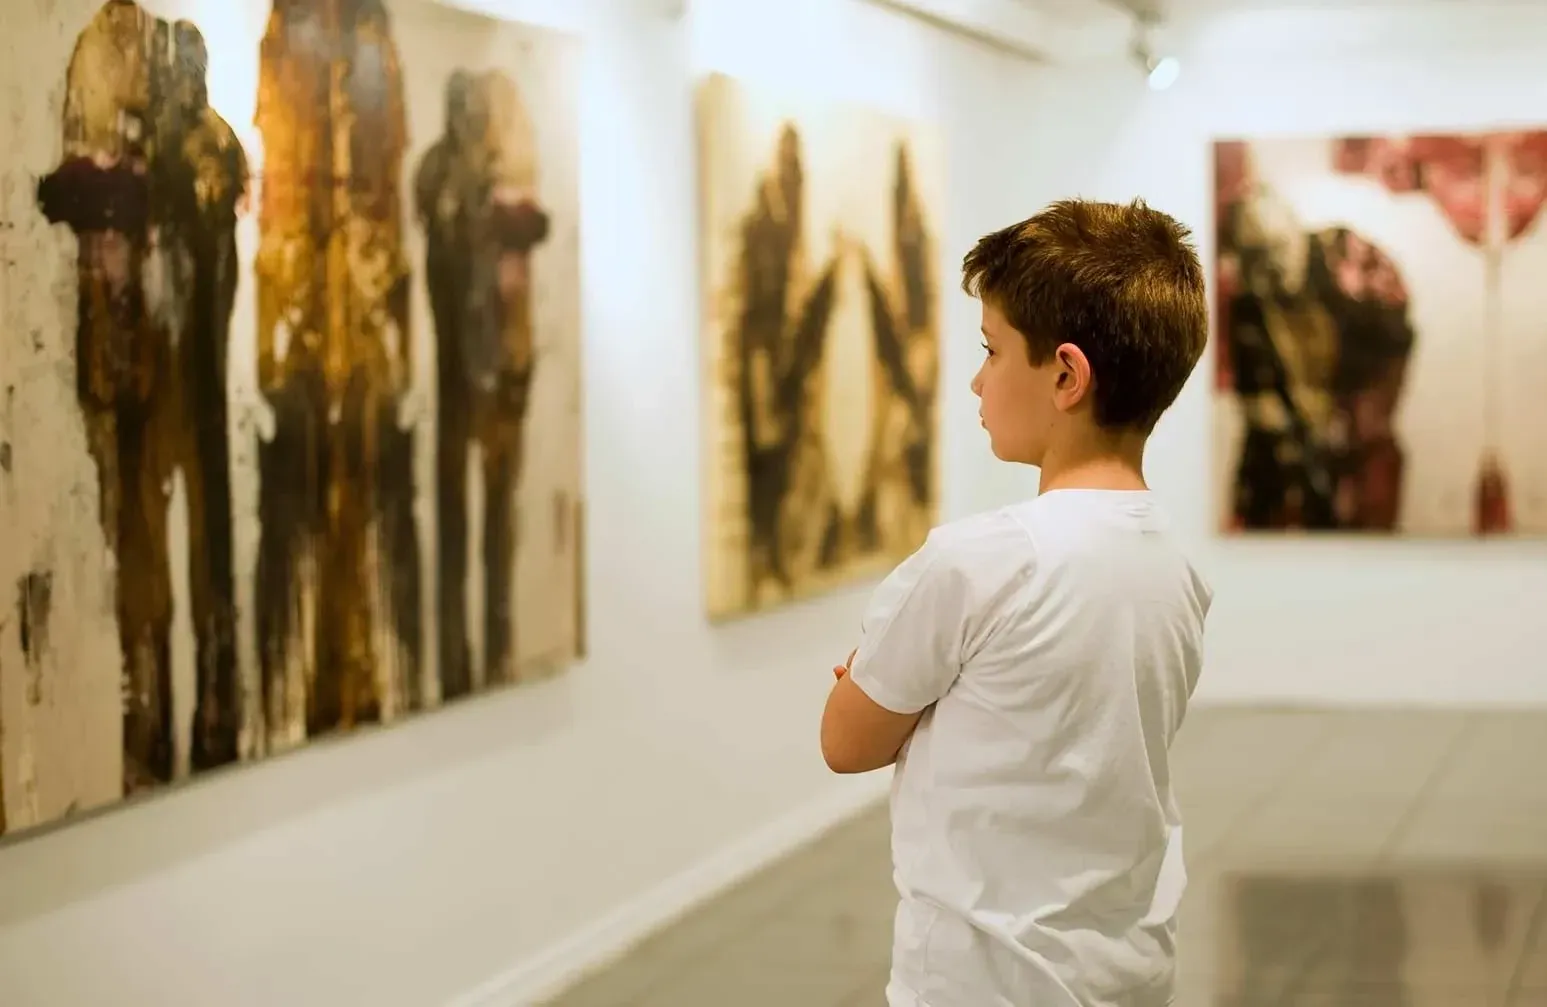 Child looking at art at a museum.